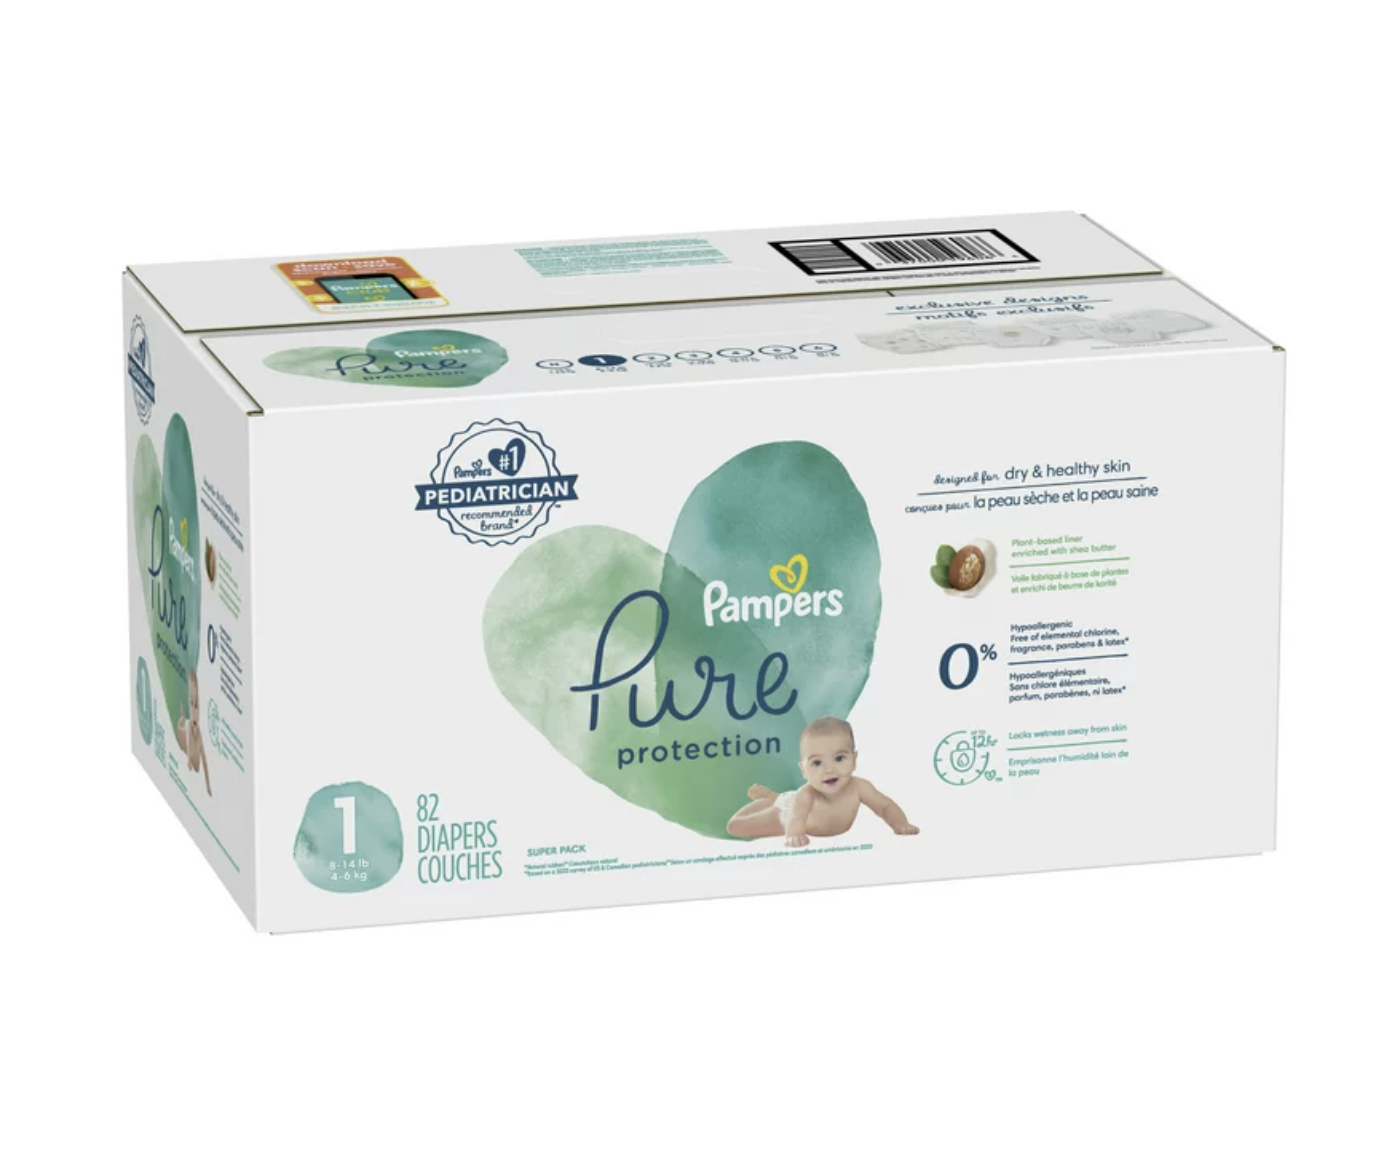 82 pampers pure protection diapers